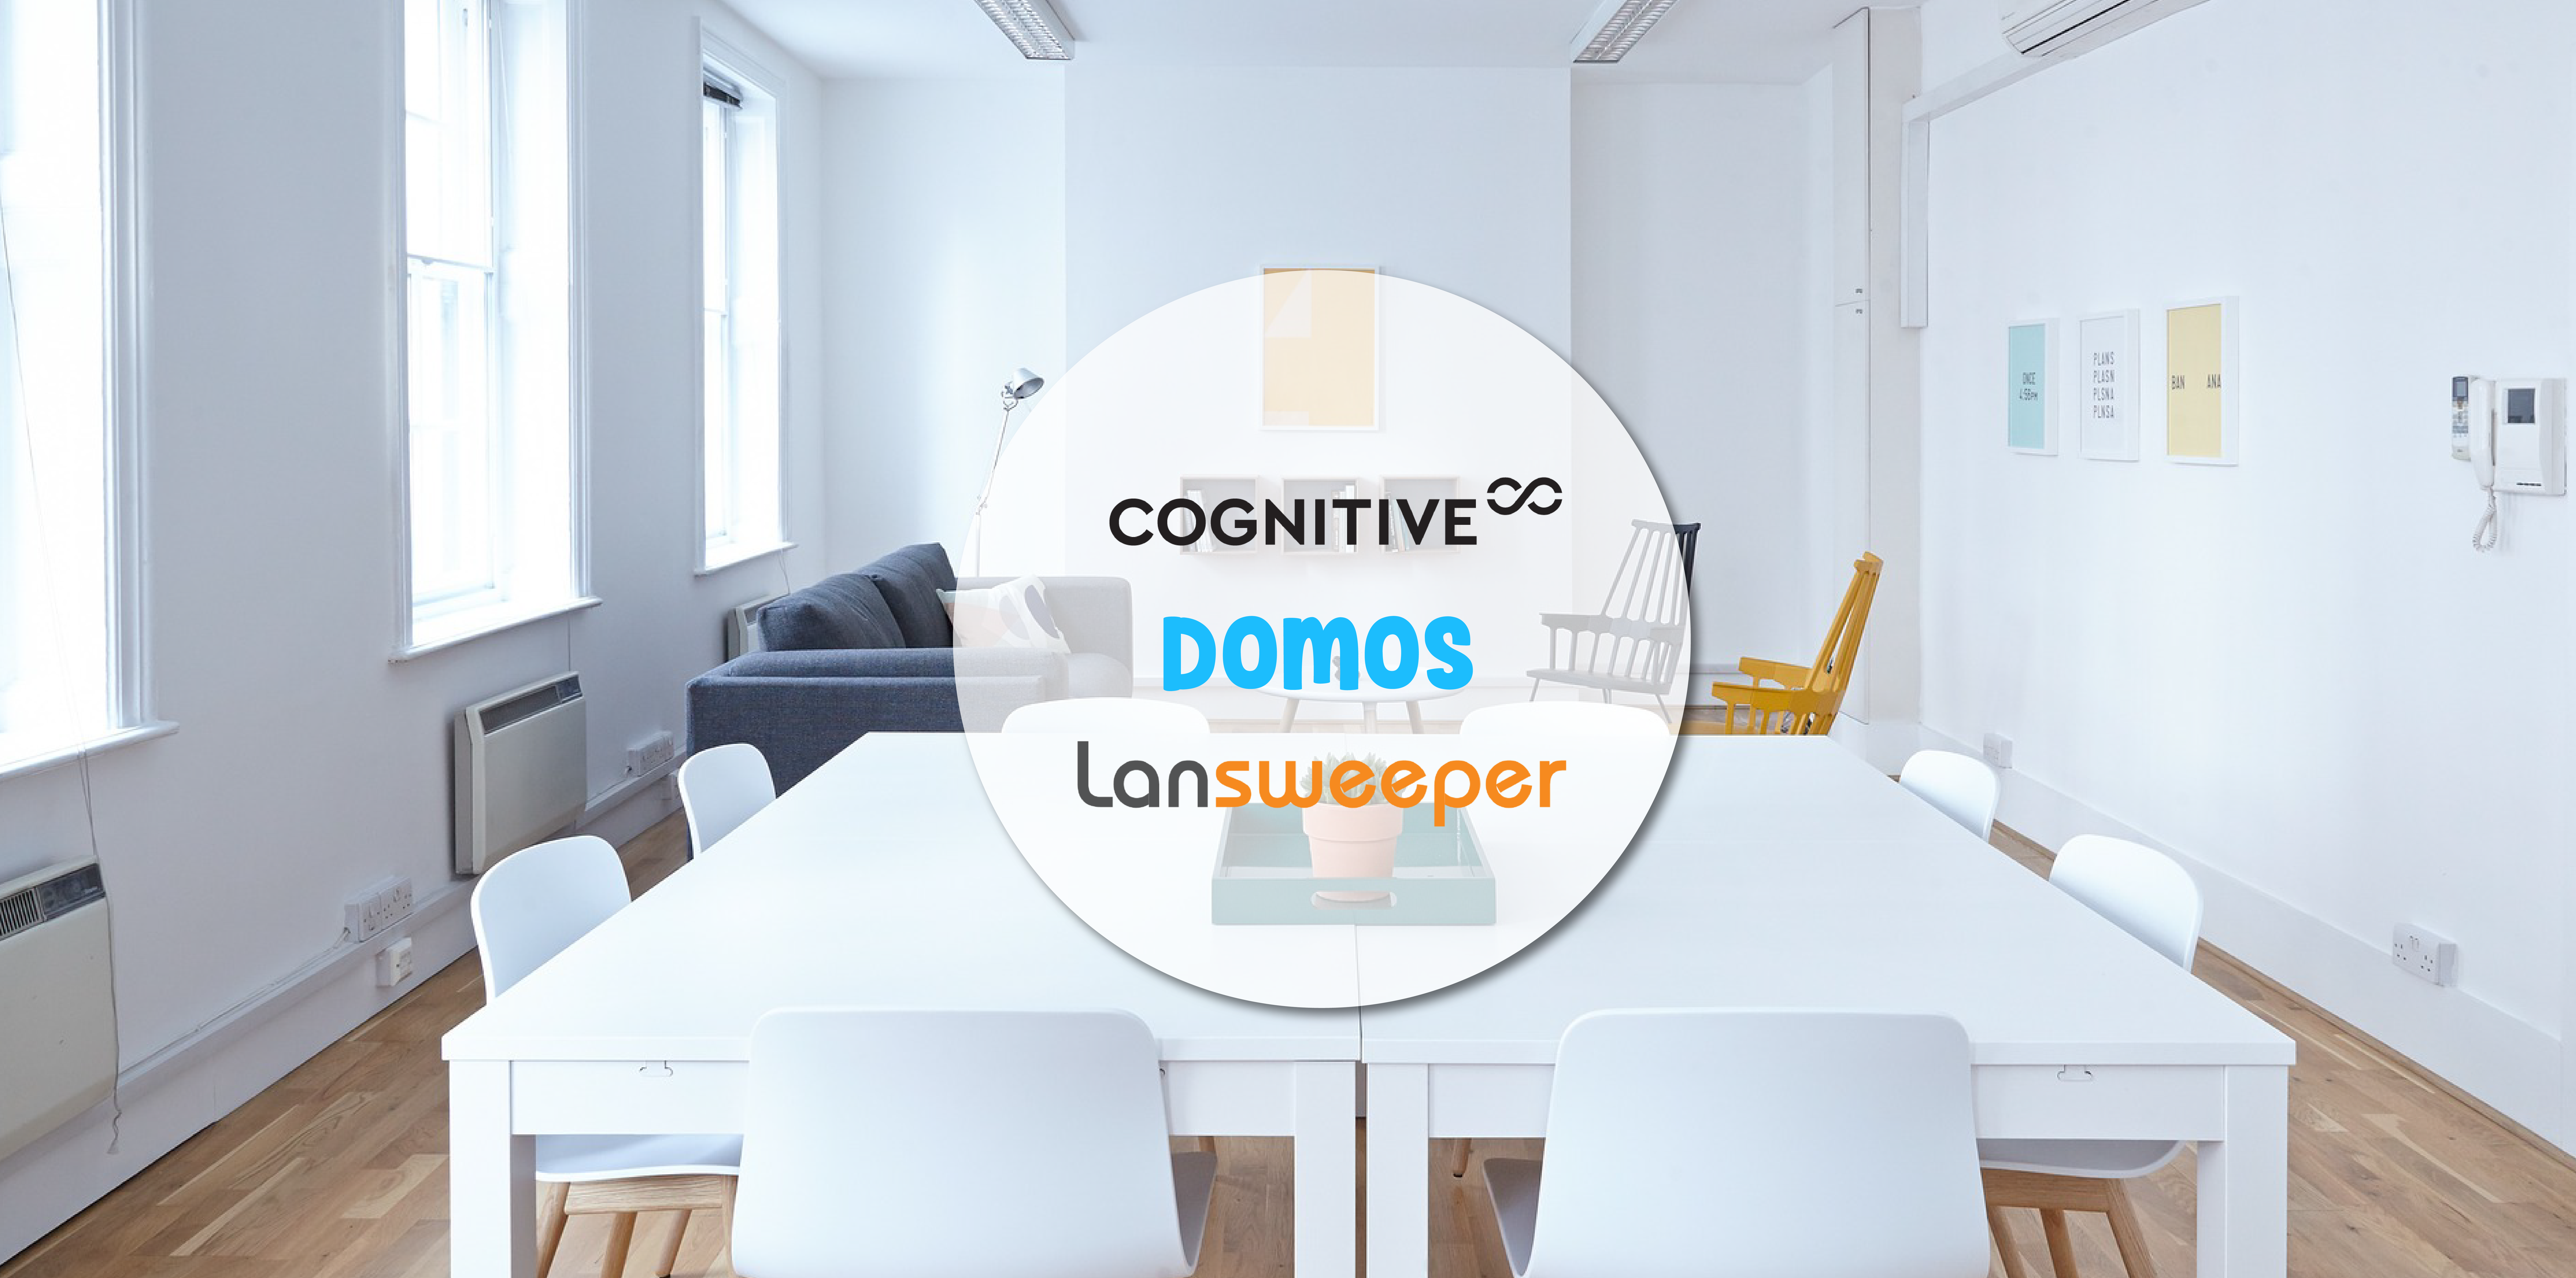 Lansweeper, Domos and Cognitive Systems logos overlay a conference room